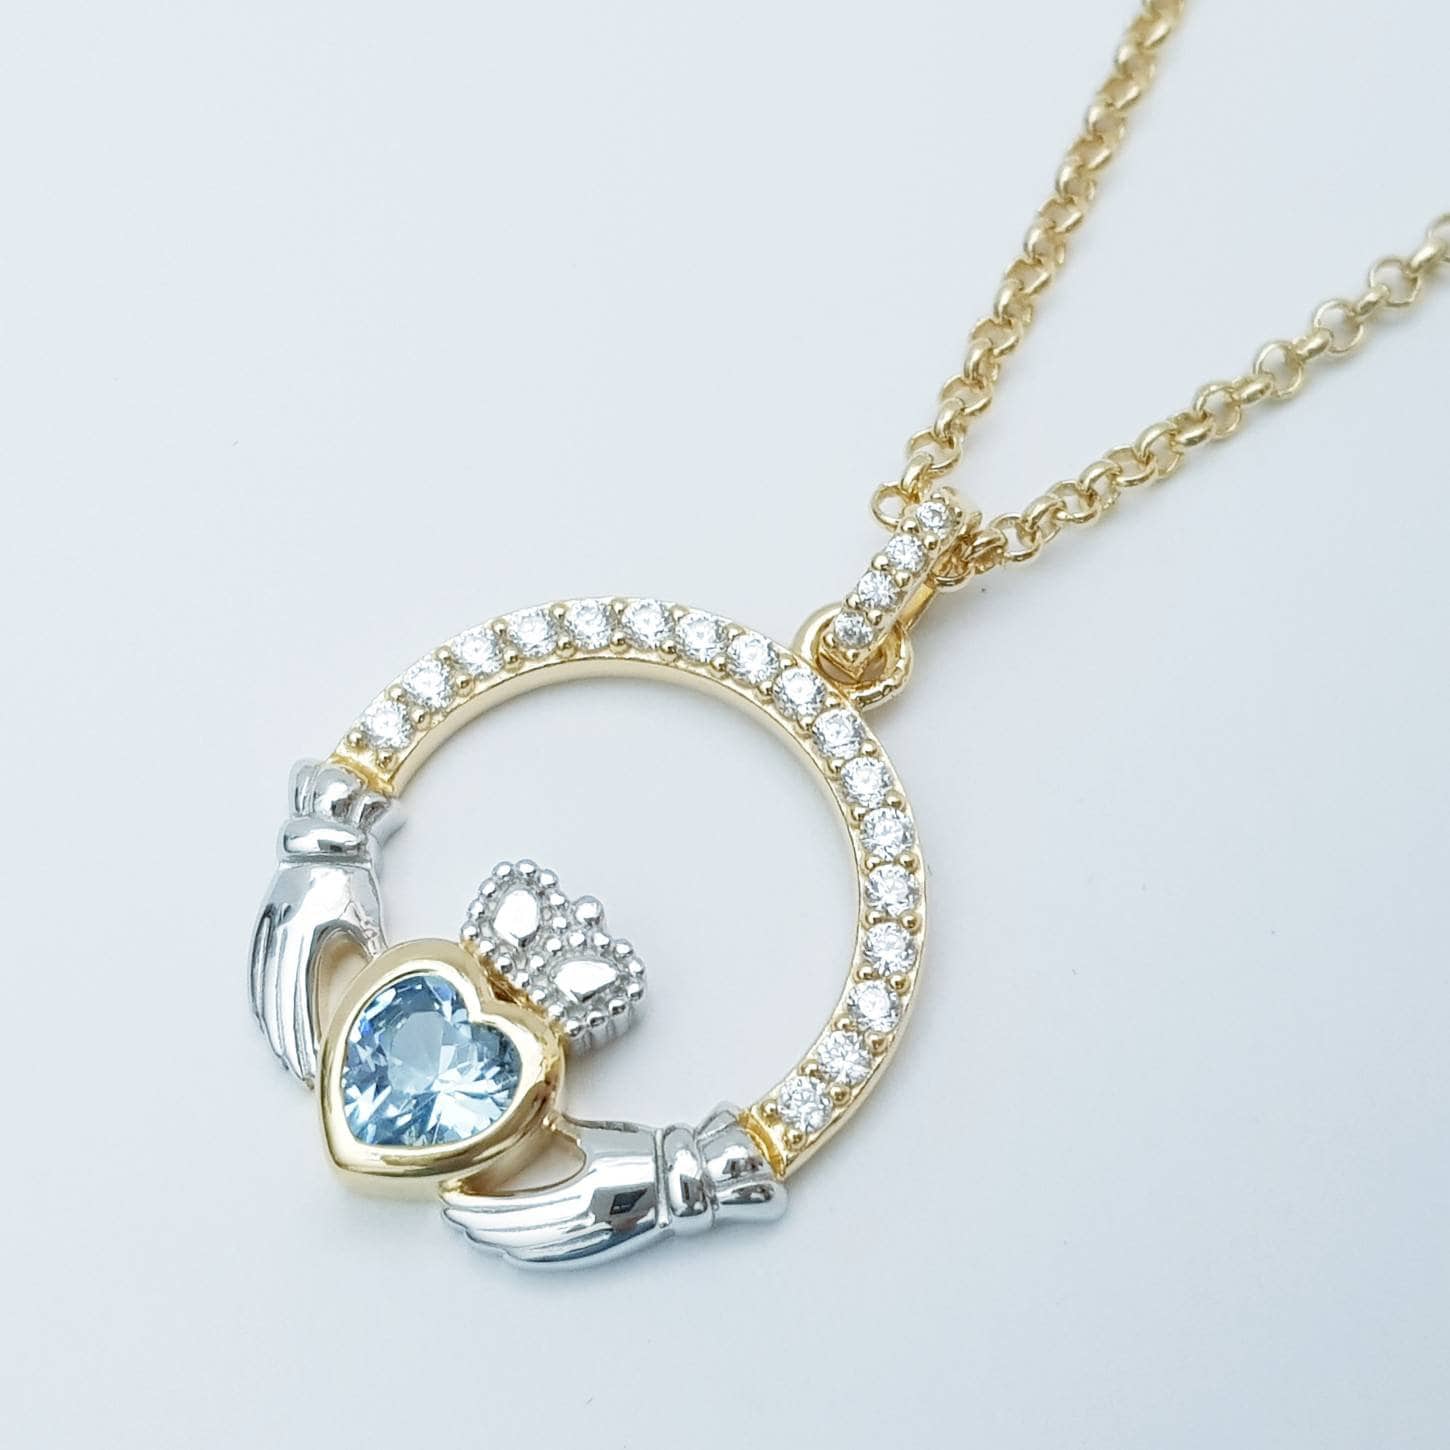 Silver and gold claddagh pendant with Aquamarine blue stone